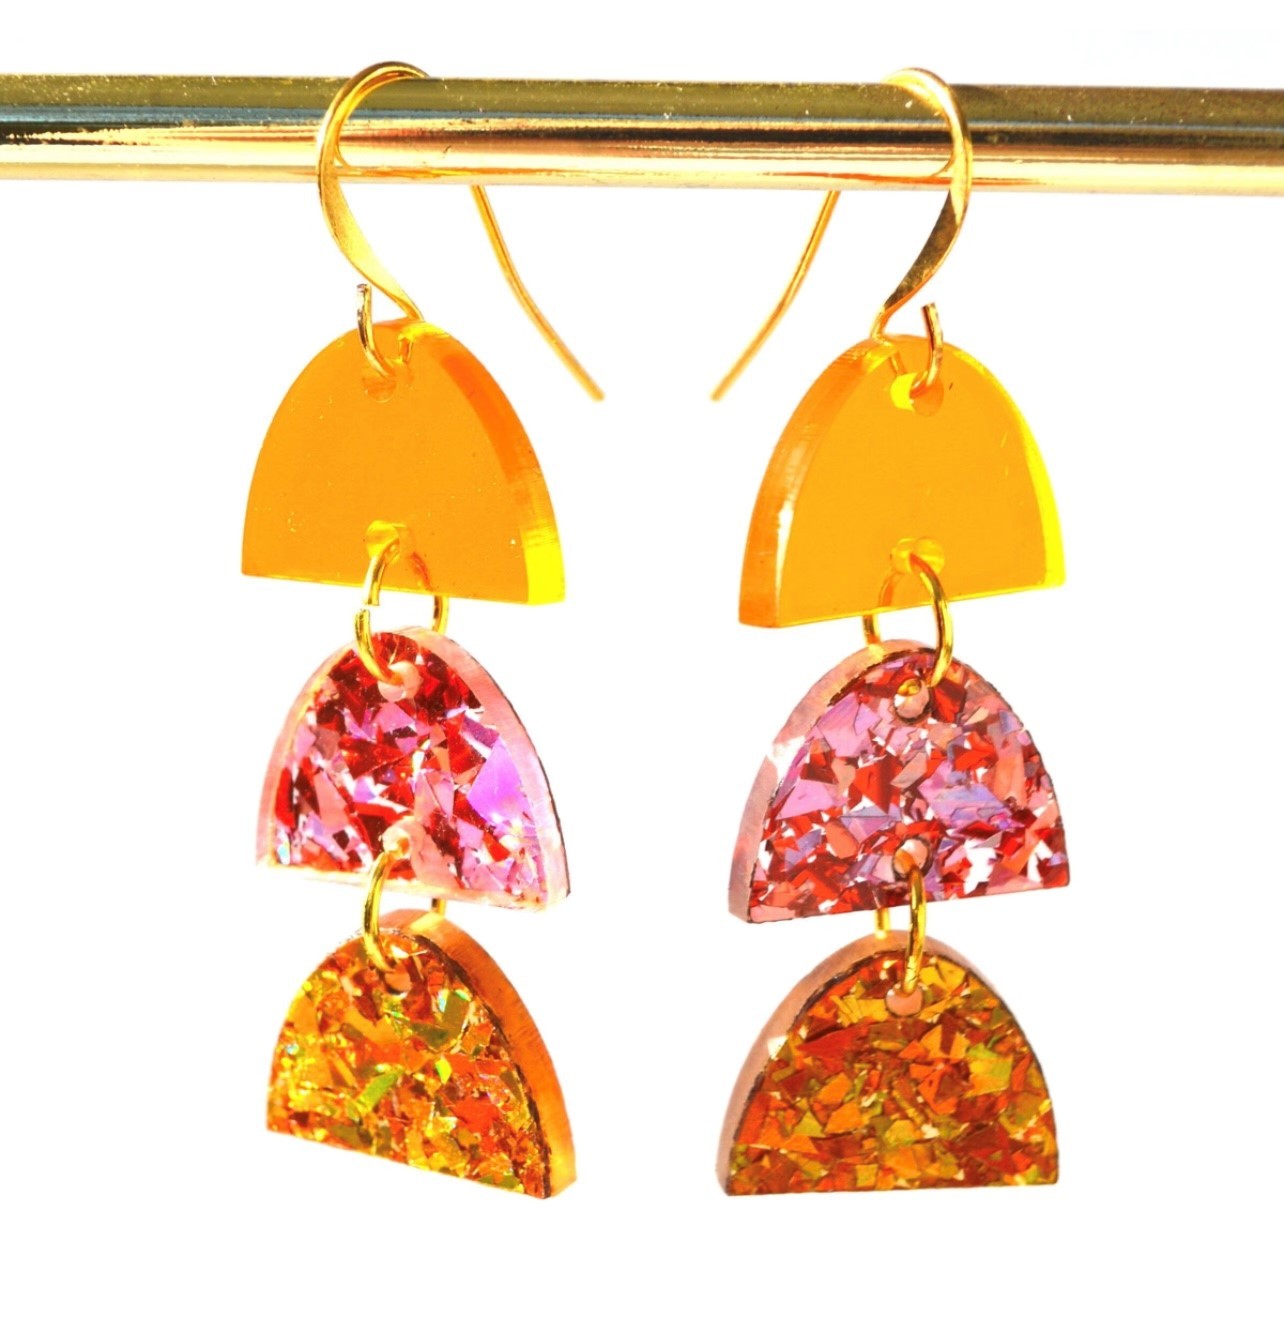 Hagen & Co Threes a Charm - Amber/Pink